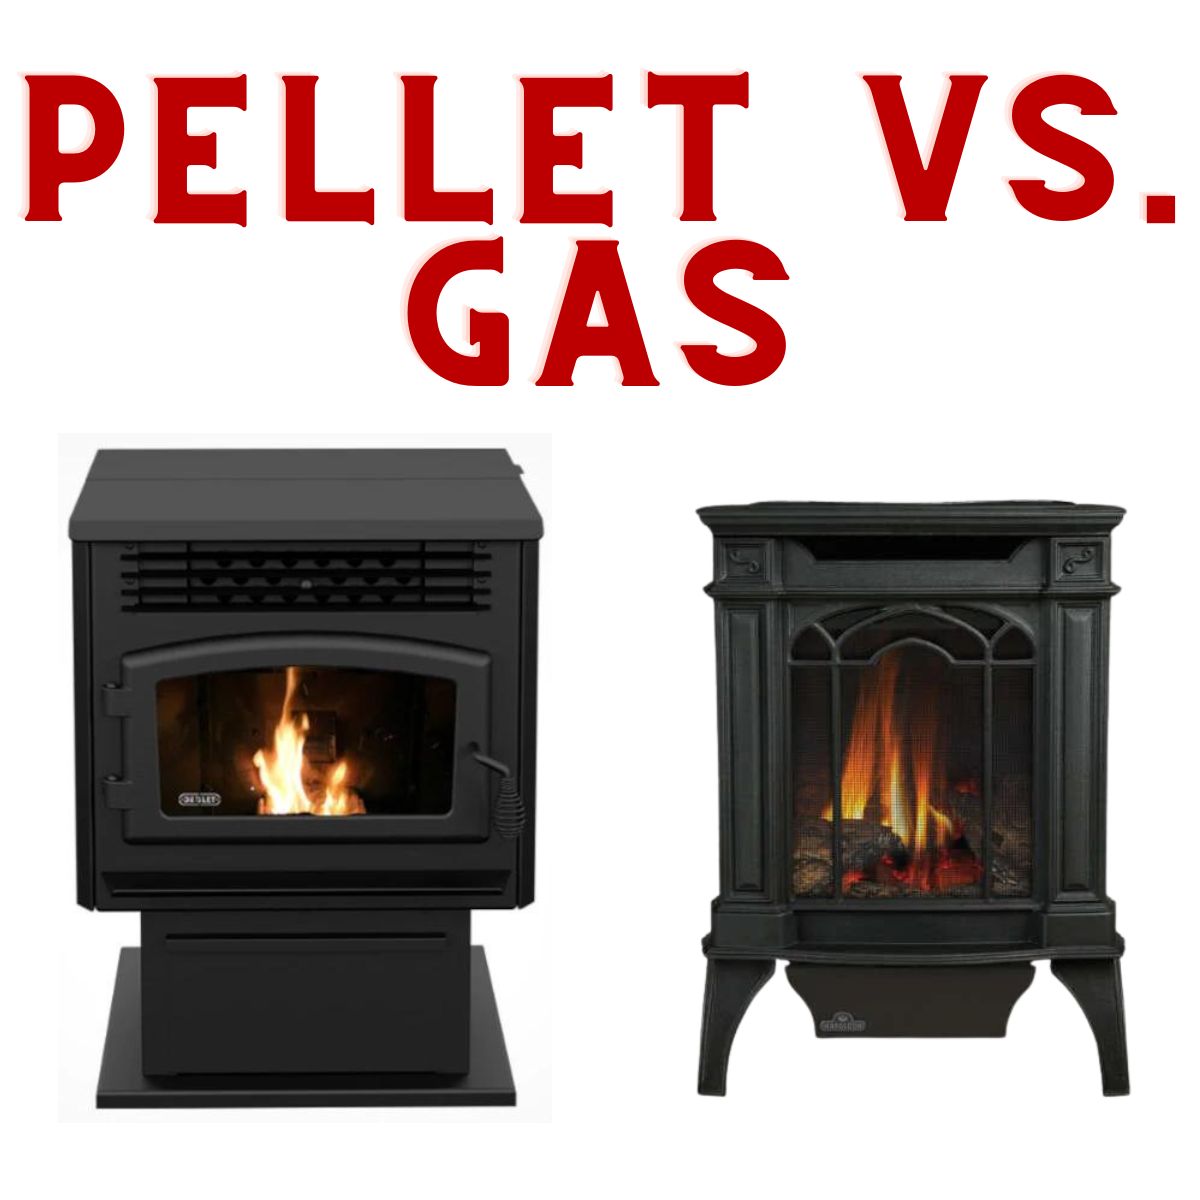 Everything You Need to Know About Buying & Burning Wood Pellets - Home and  Hearth, Wood Pellet Stoves, Fireplaces, Wood Stoves